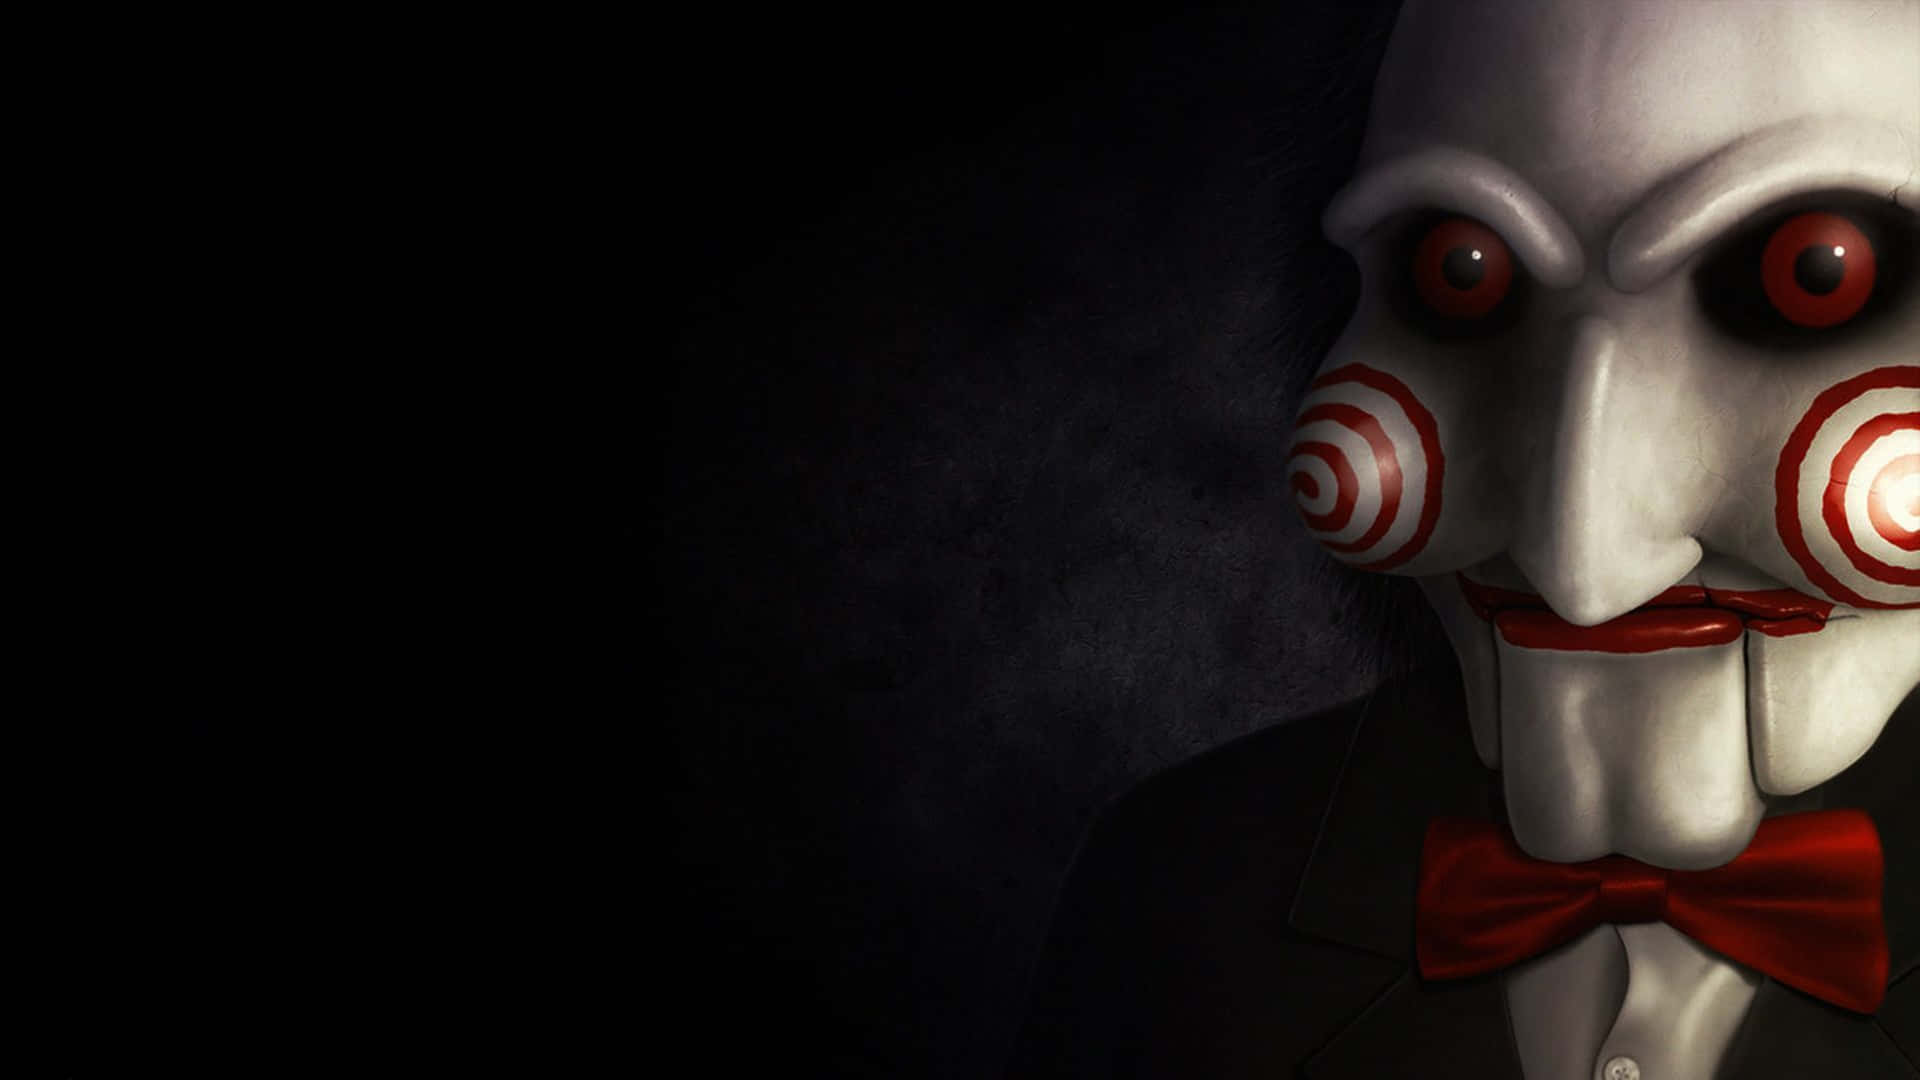 A Creepy Clown With A Bow Tie And A Dark Background Background